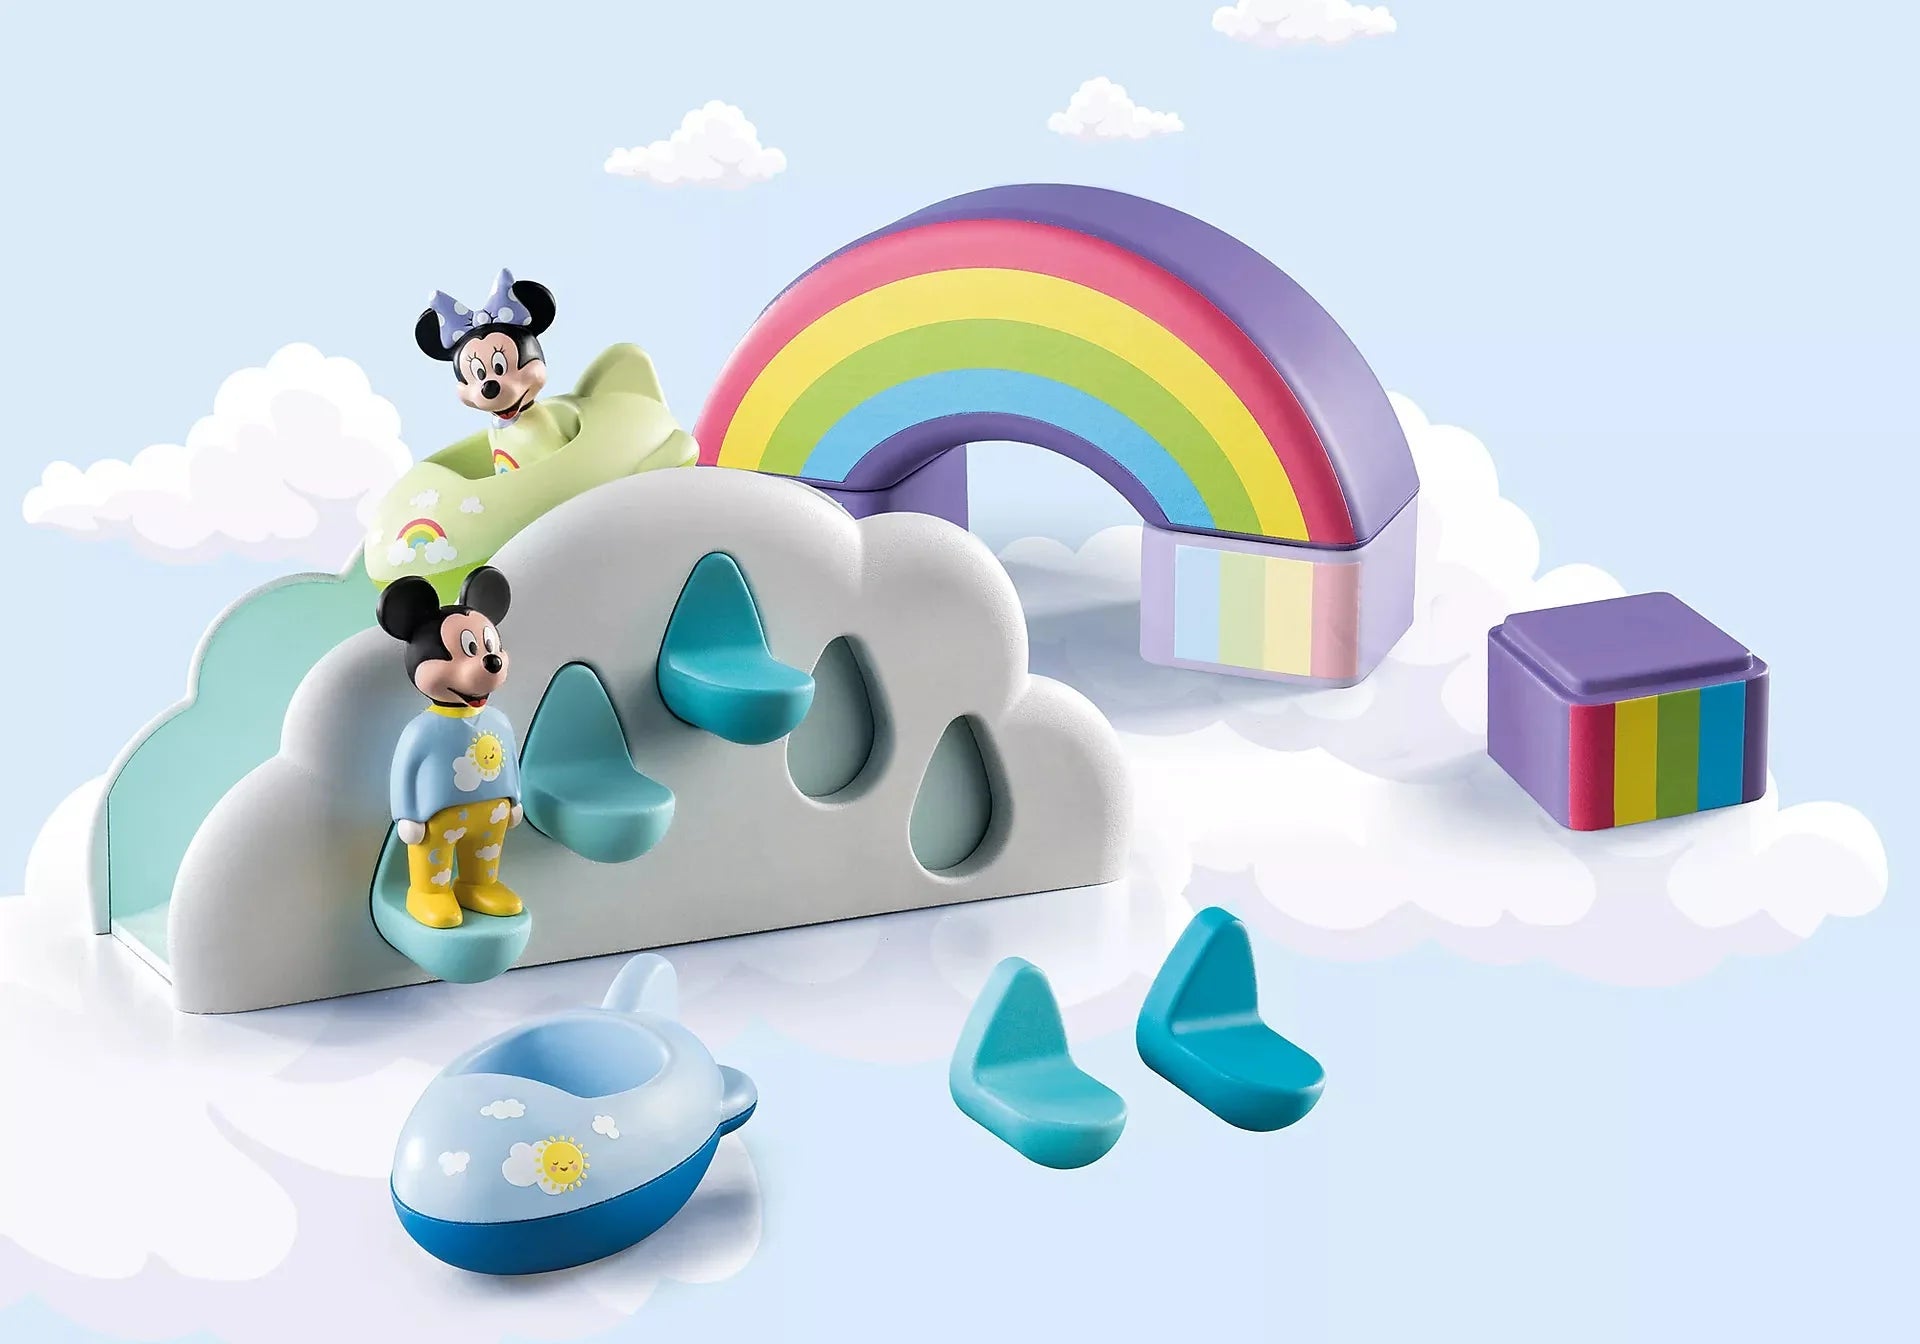 1.2.3. & Disney: Mickey & Minnie's Home in the Clouds